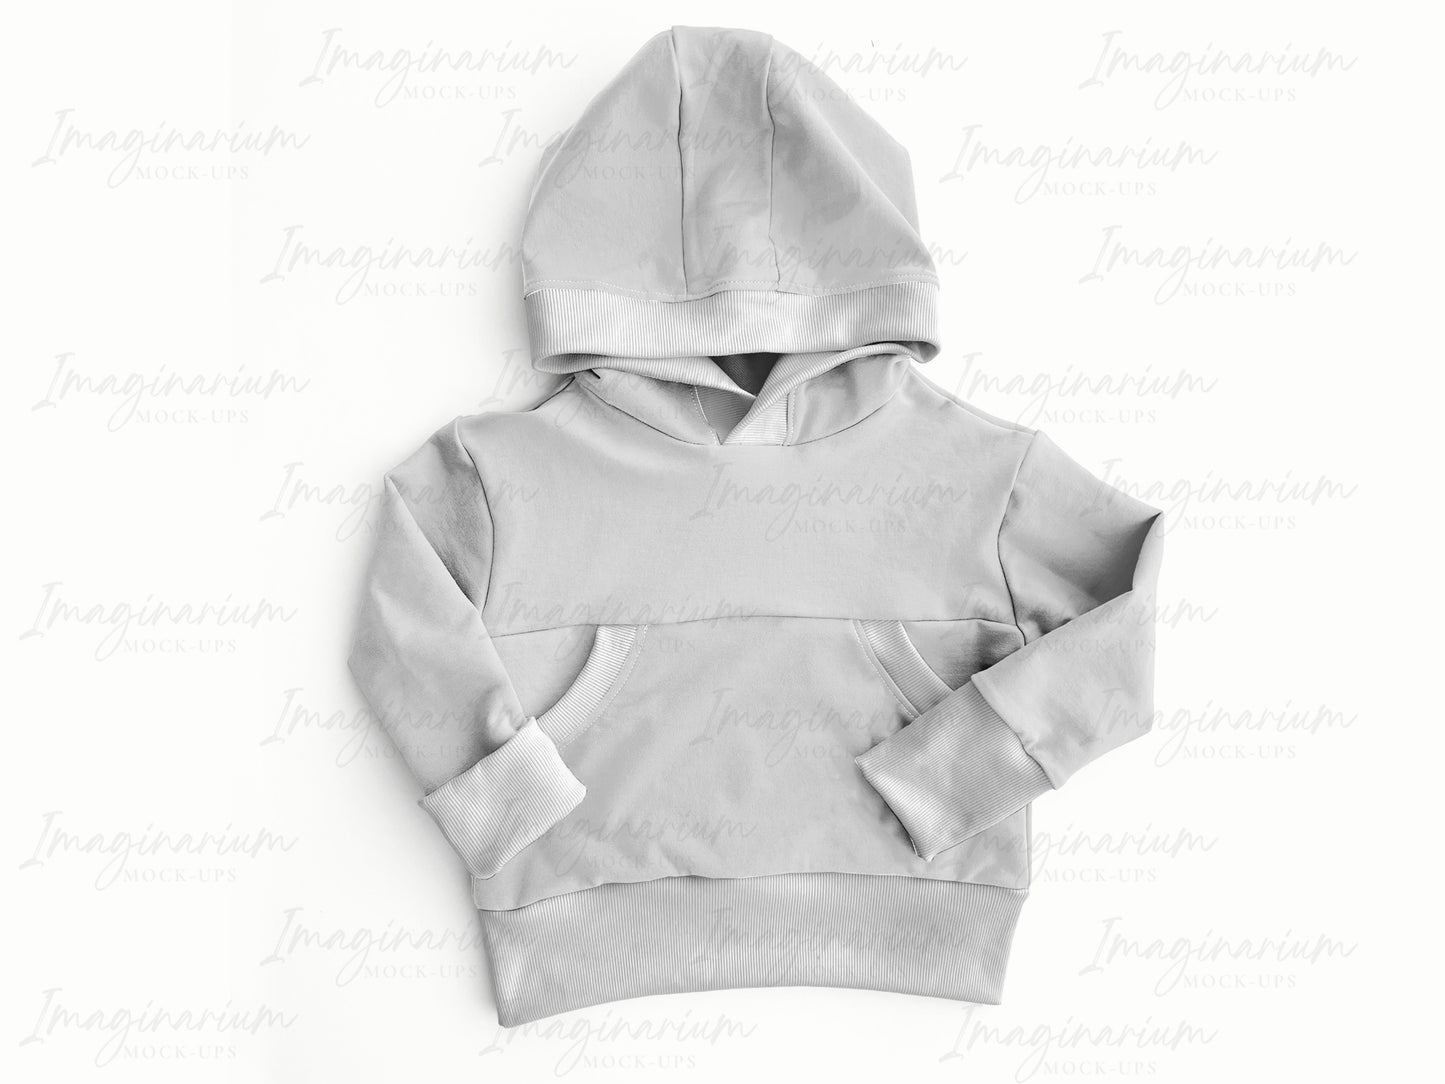 Gus + Steel Joey Pullover Hoodie Mock Up, Realistic Clothing Mockup for Photoshop and Procreate